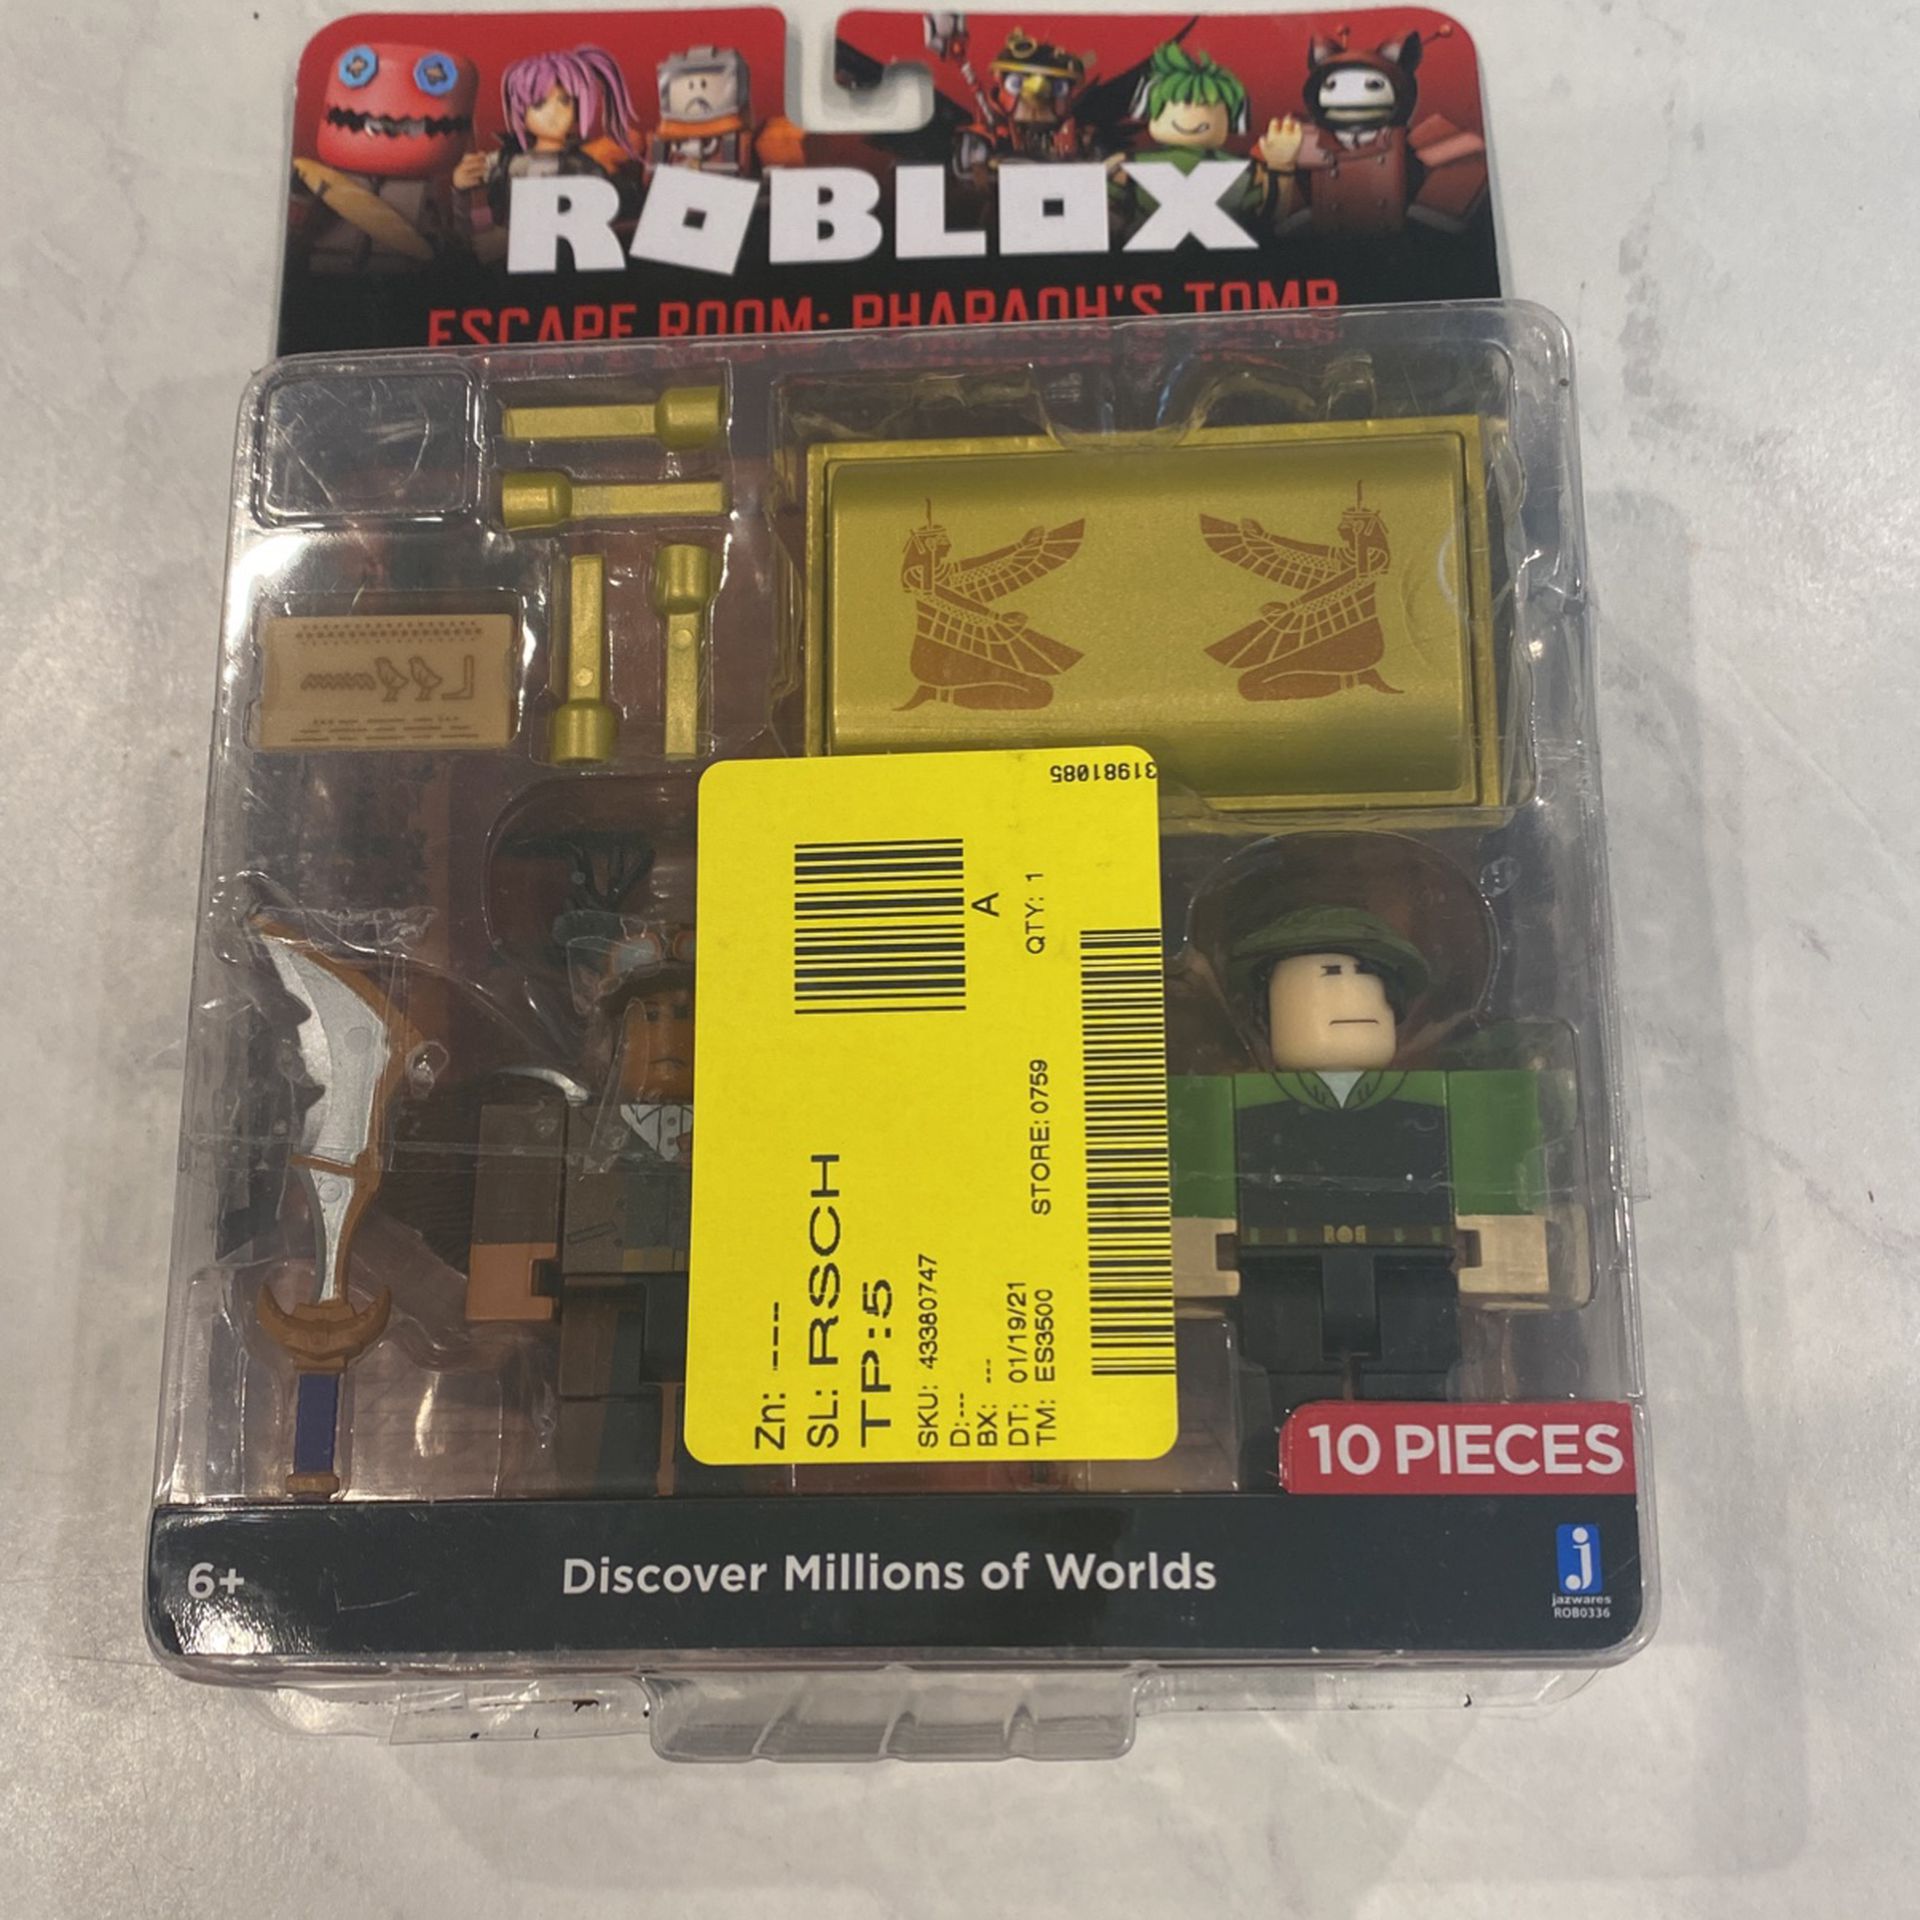 ROBLOX GAME PACK ACTION ESCAPE ROOM PHARAOH'S TOMB - SUNNY - Ri Happy